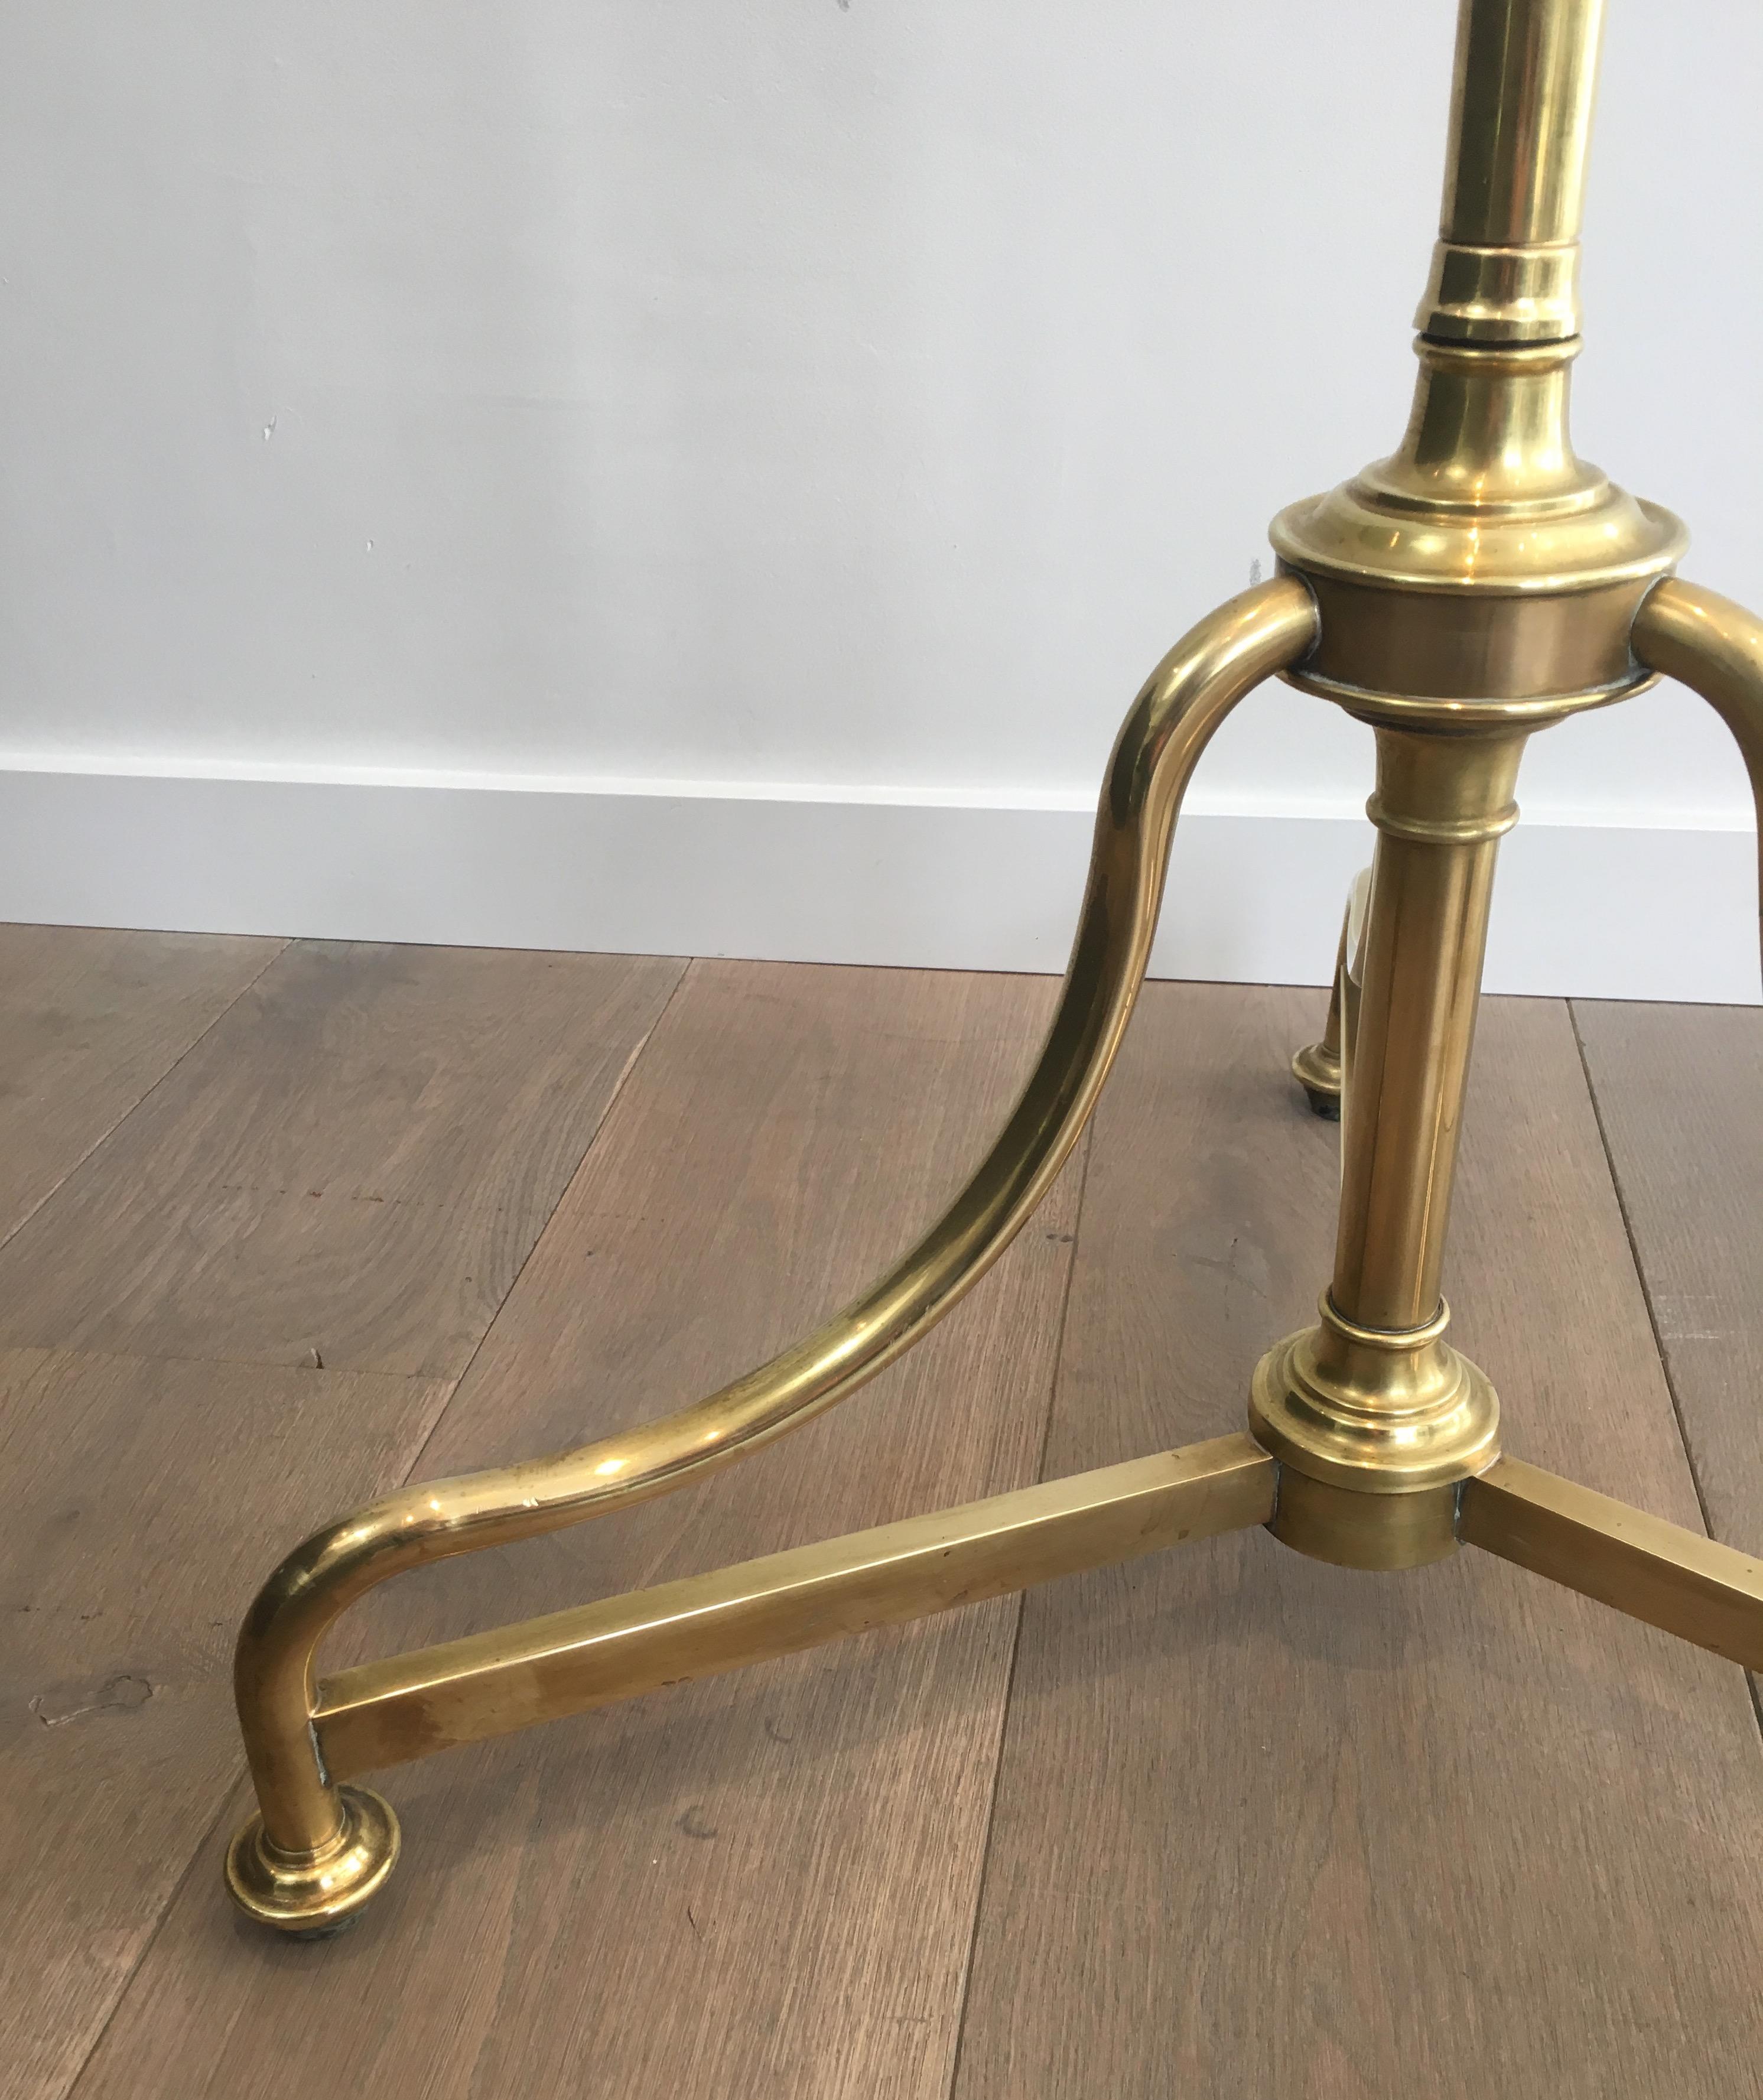 Unusual Tall Black Lacquered and Brass Coat and Hat Rack, French, circa 1900 For Sale 5